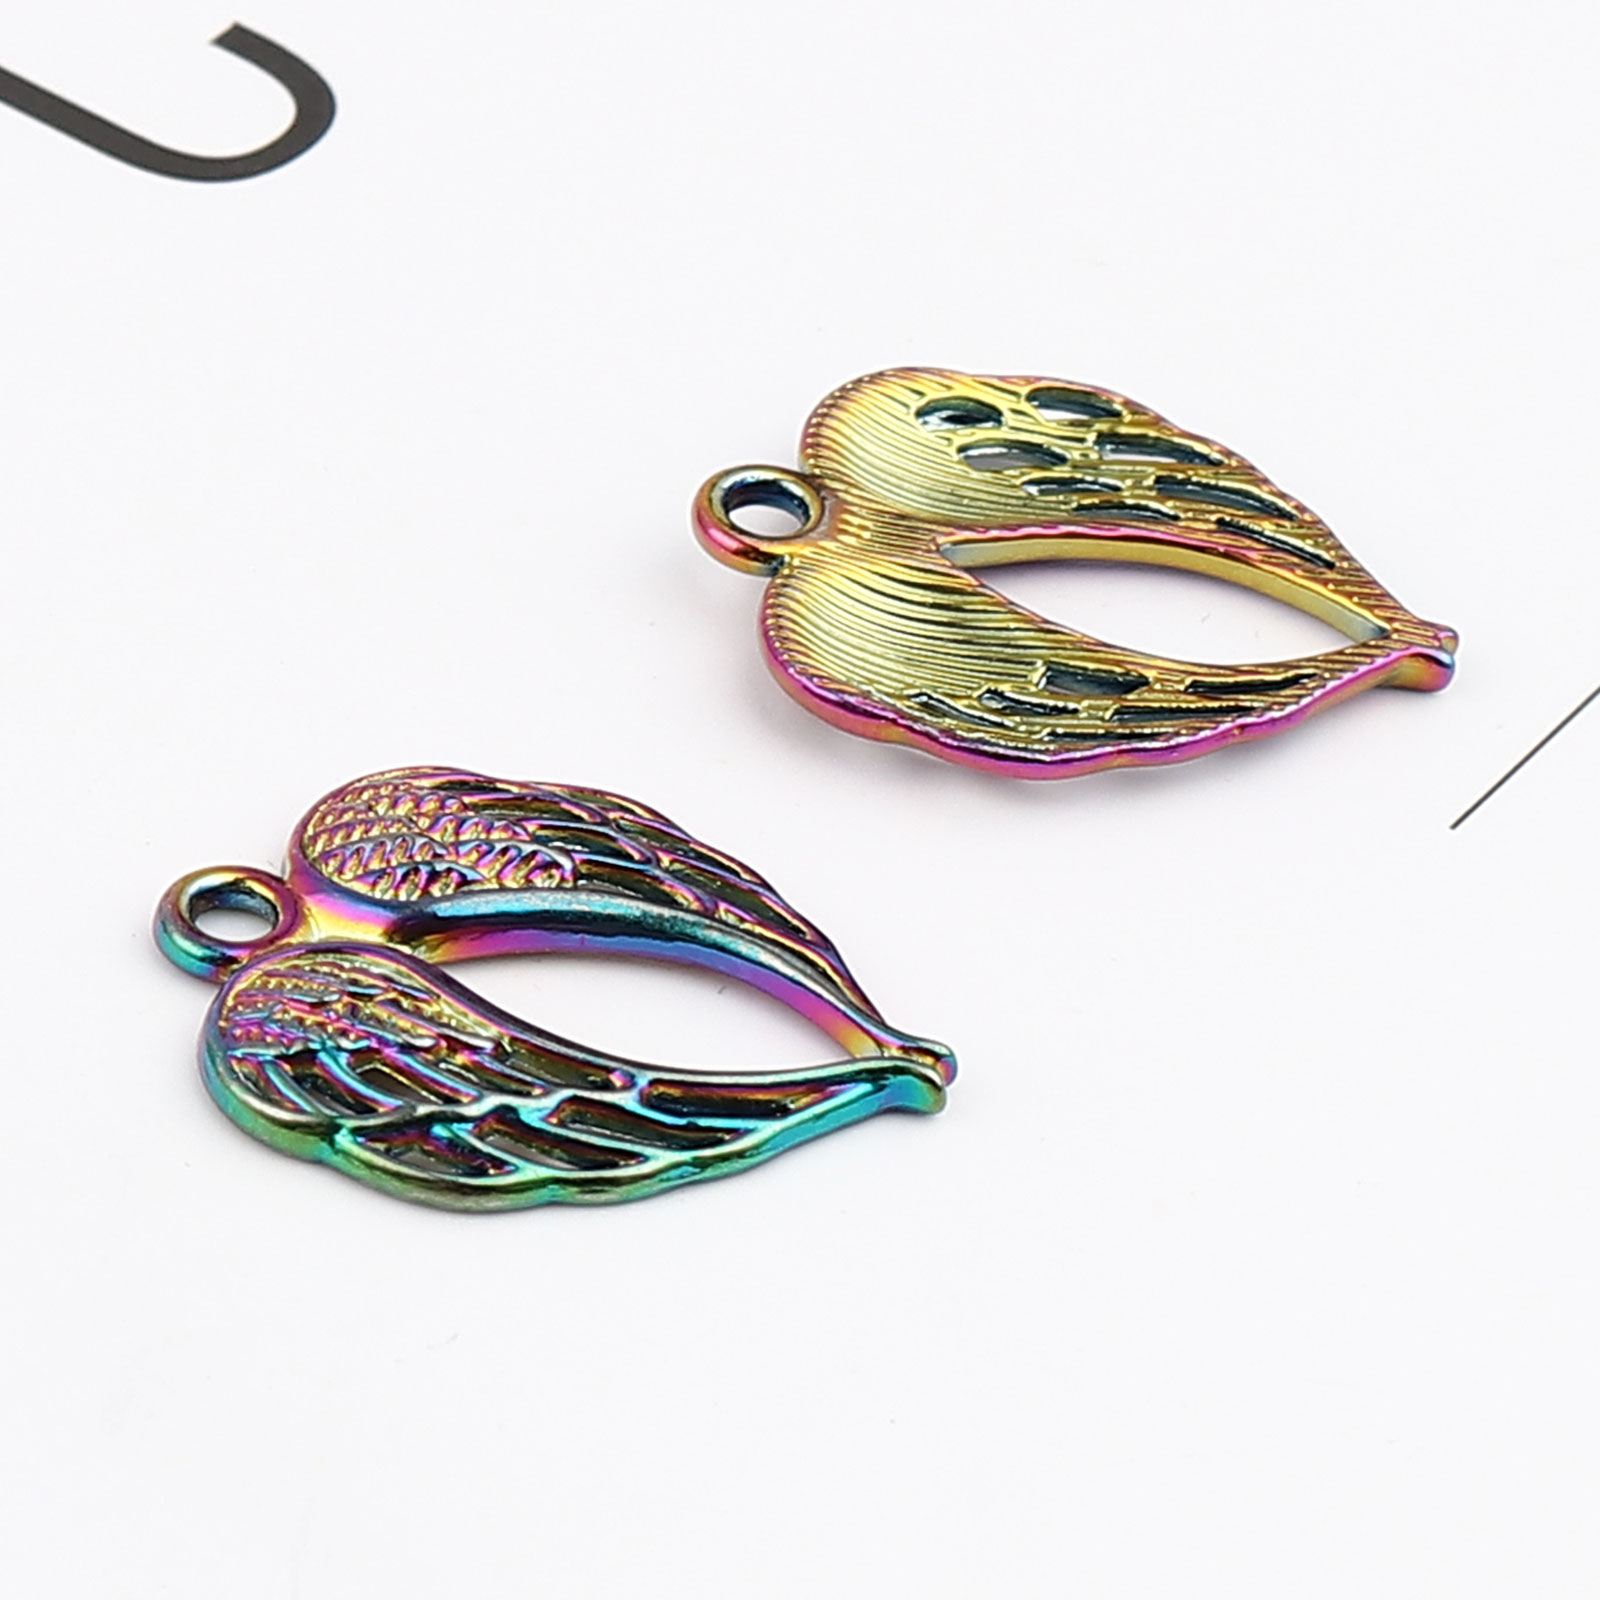 Picture of Zinc Based Alloy Charms Wing Multicolor Heart 21mm x 17mm, 10 PCs